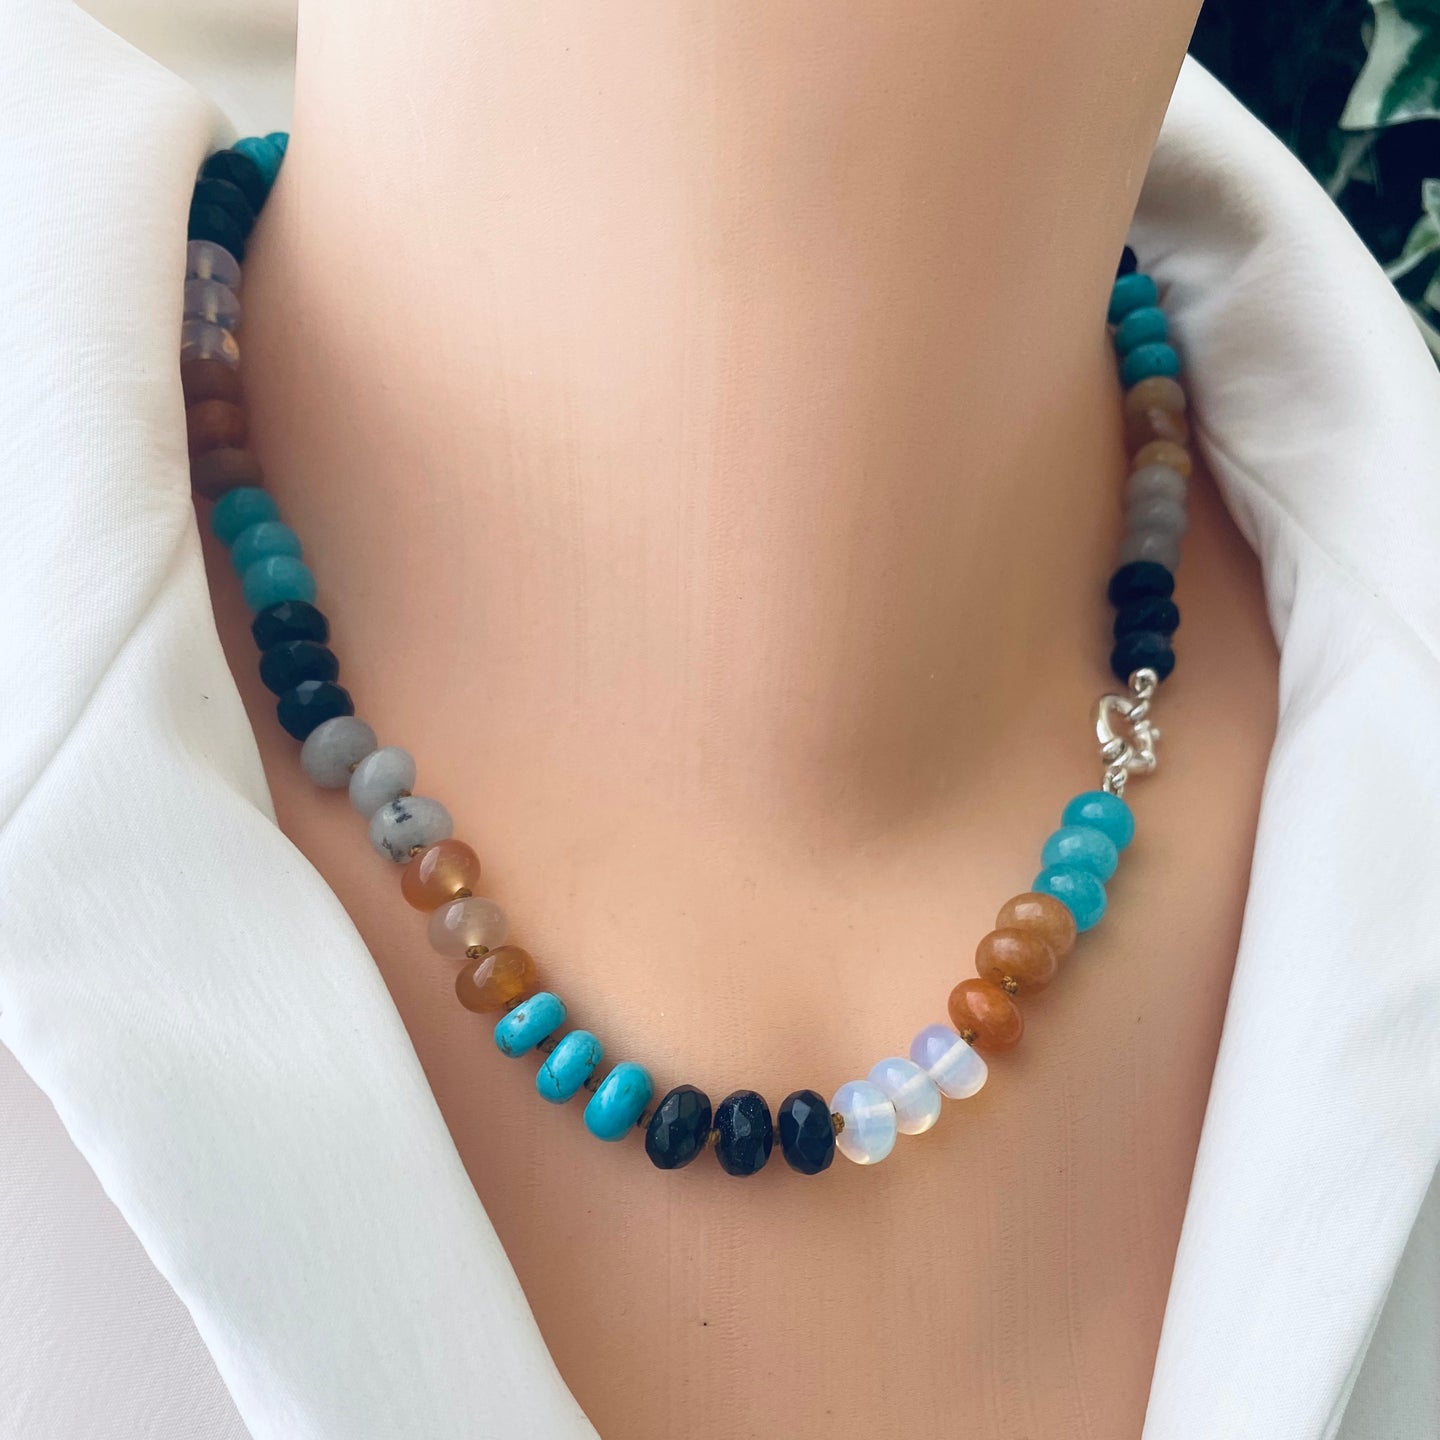 Hand-Knotted Aventurine, Turquoise, Onyx & Jade Candy Necklace with Silver Marine Clasp, 18 inches